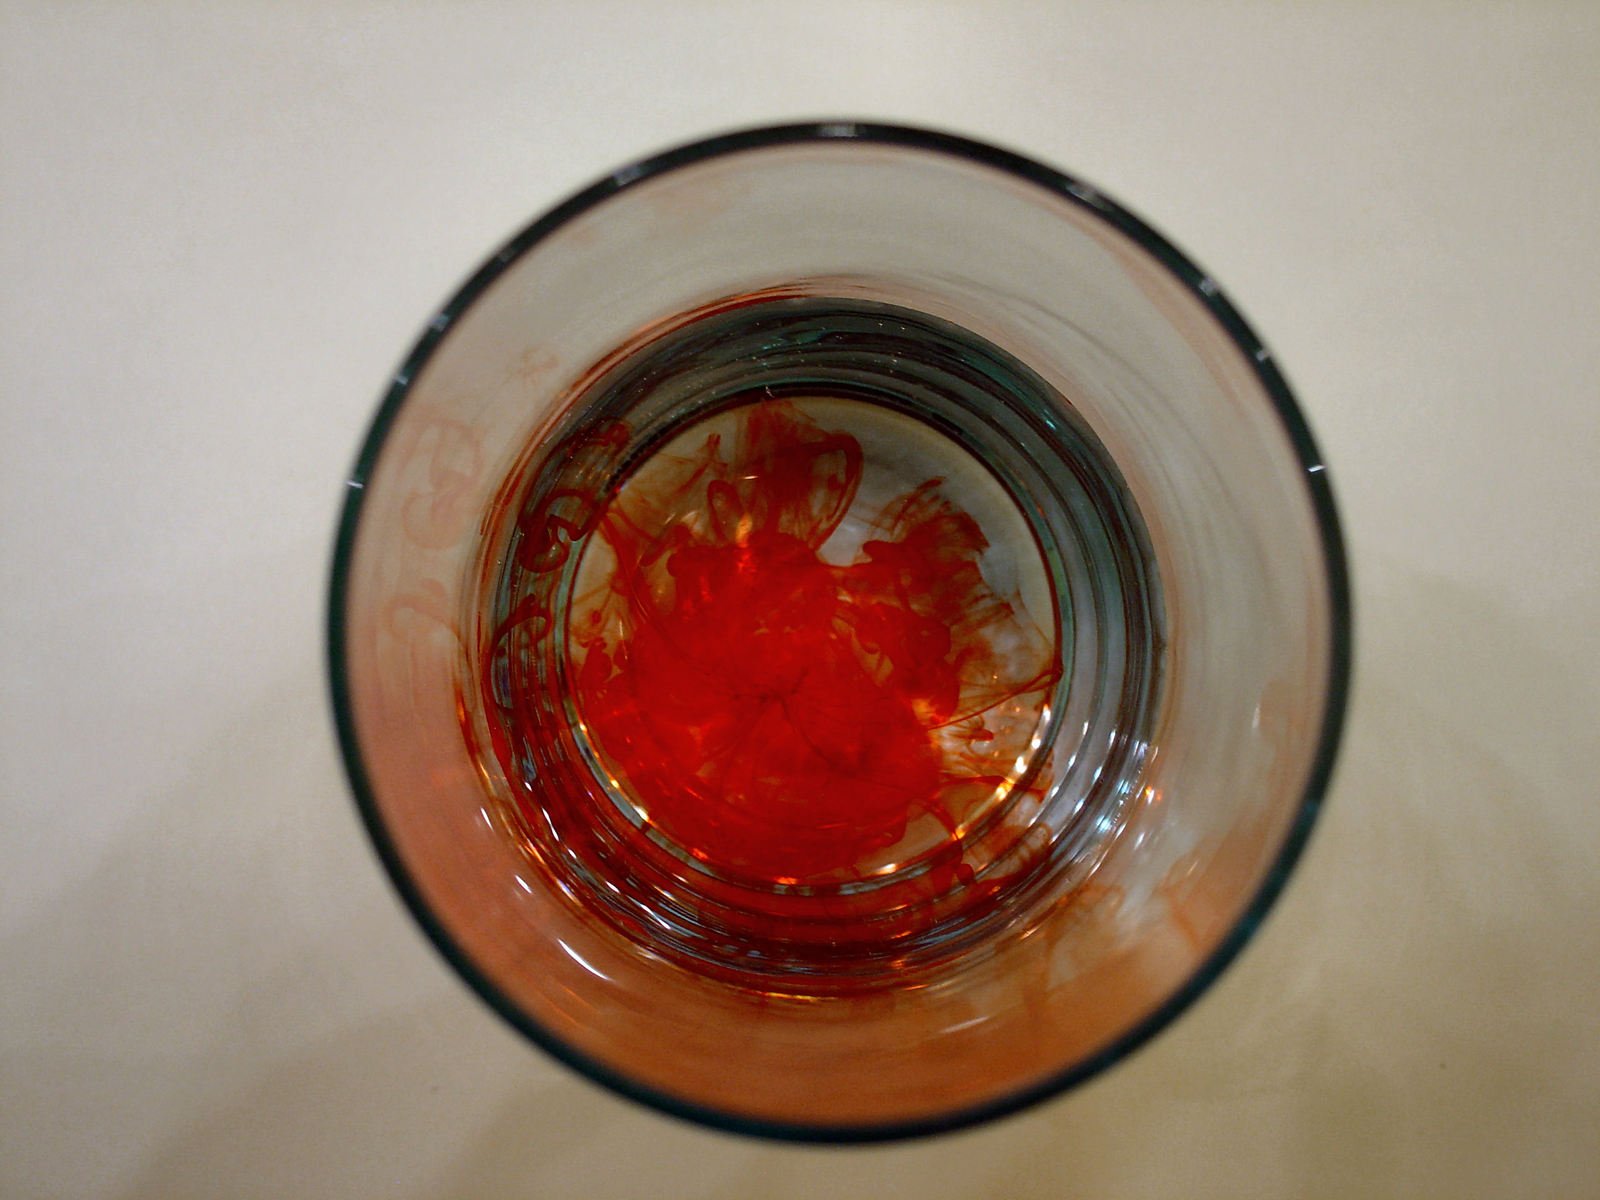 an extreme closeup of some wine in a glass